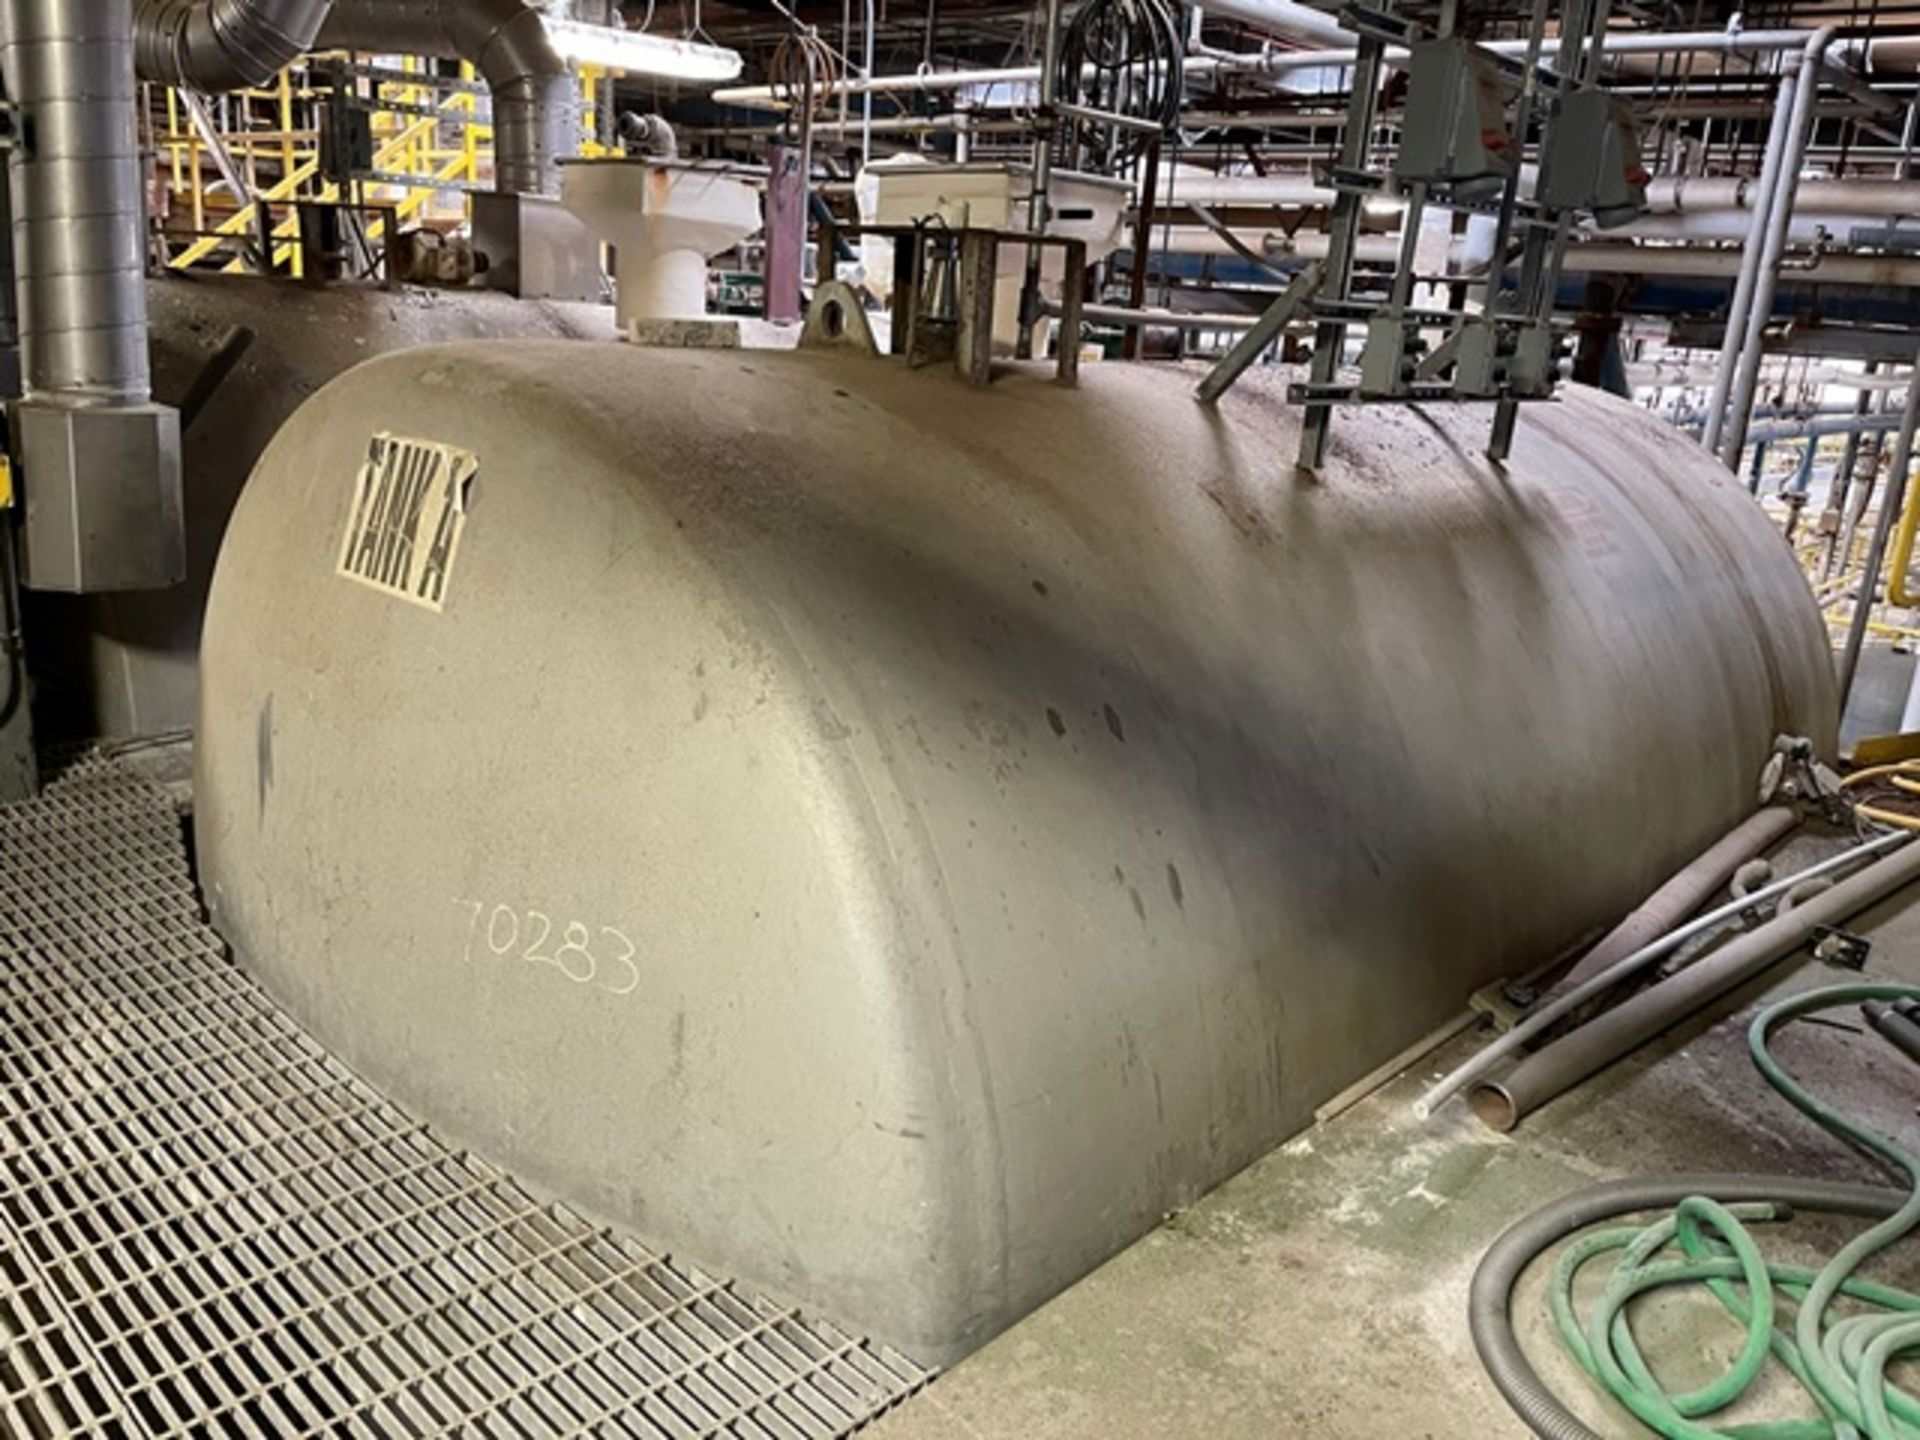 Carbon Steel Tank, 8' Dia. X 13' Length, Tank A, Rigging & Loading Fee: $2600 - Image 2 of 2